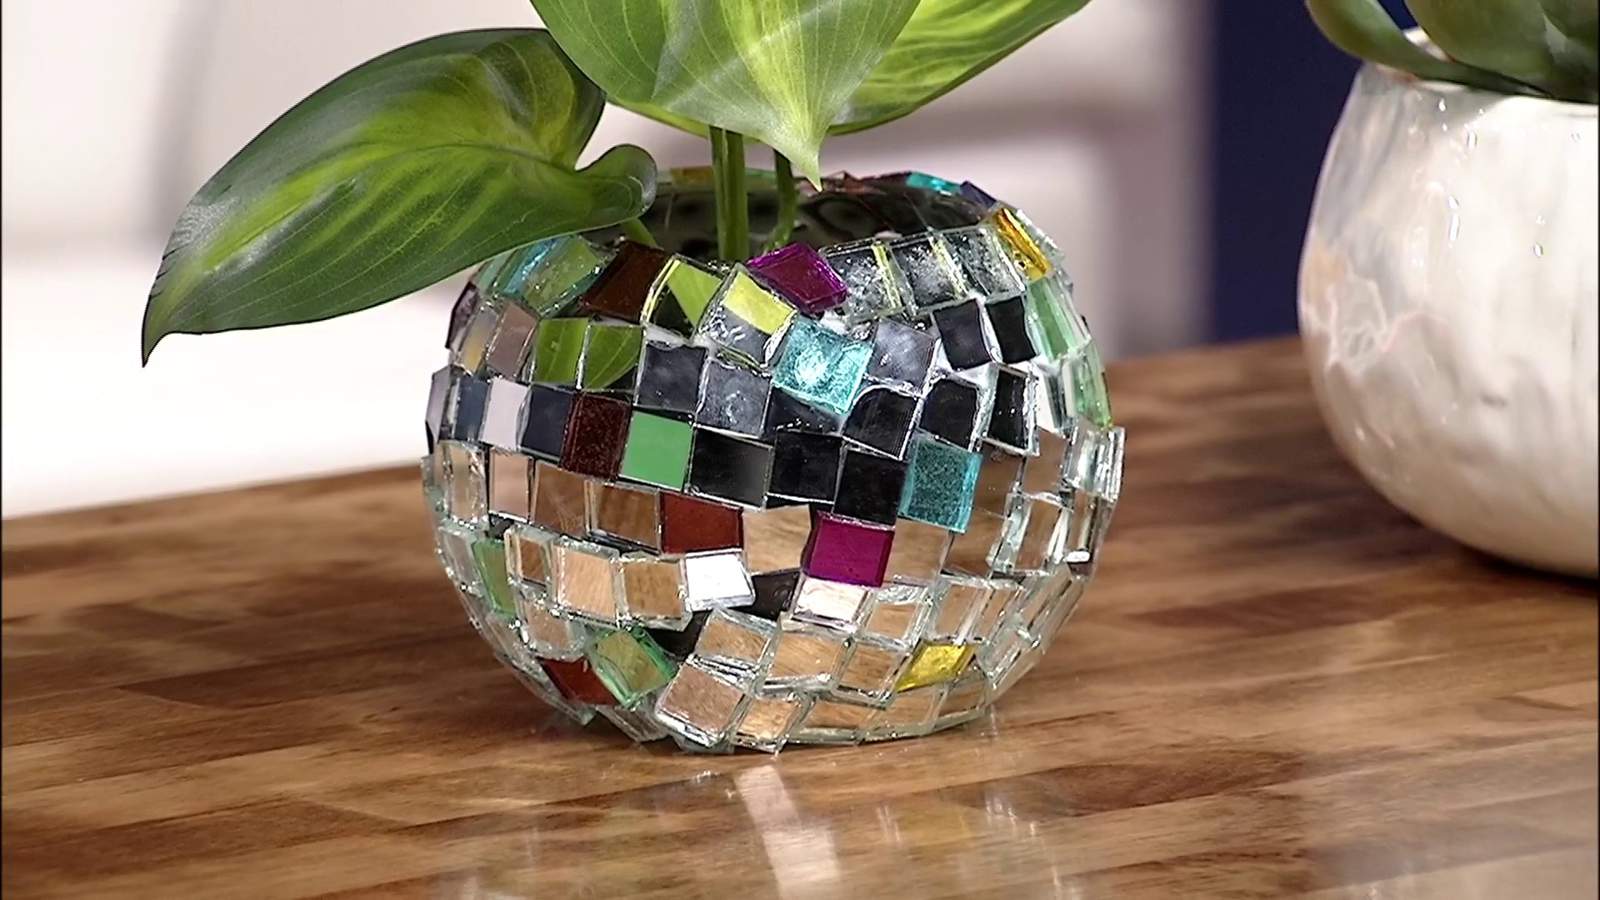 Give your plants a groovy home in this DIY disco ball vase